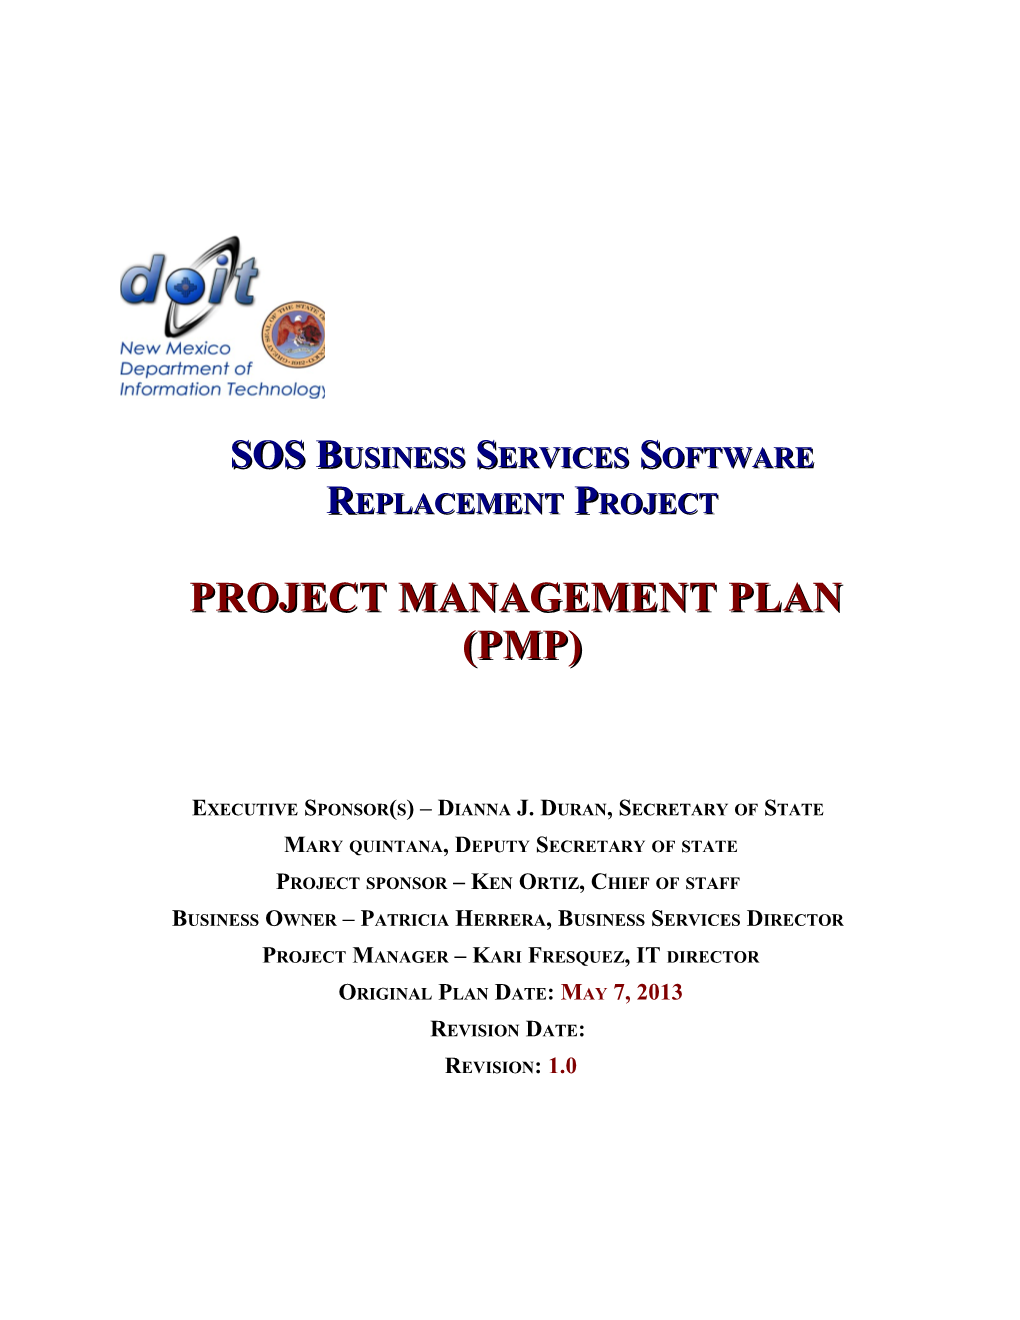 SOS Business Services Software Replacement Project